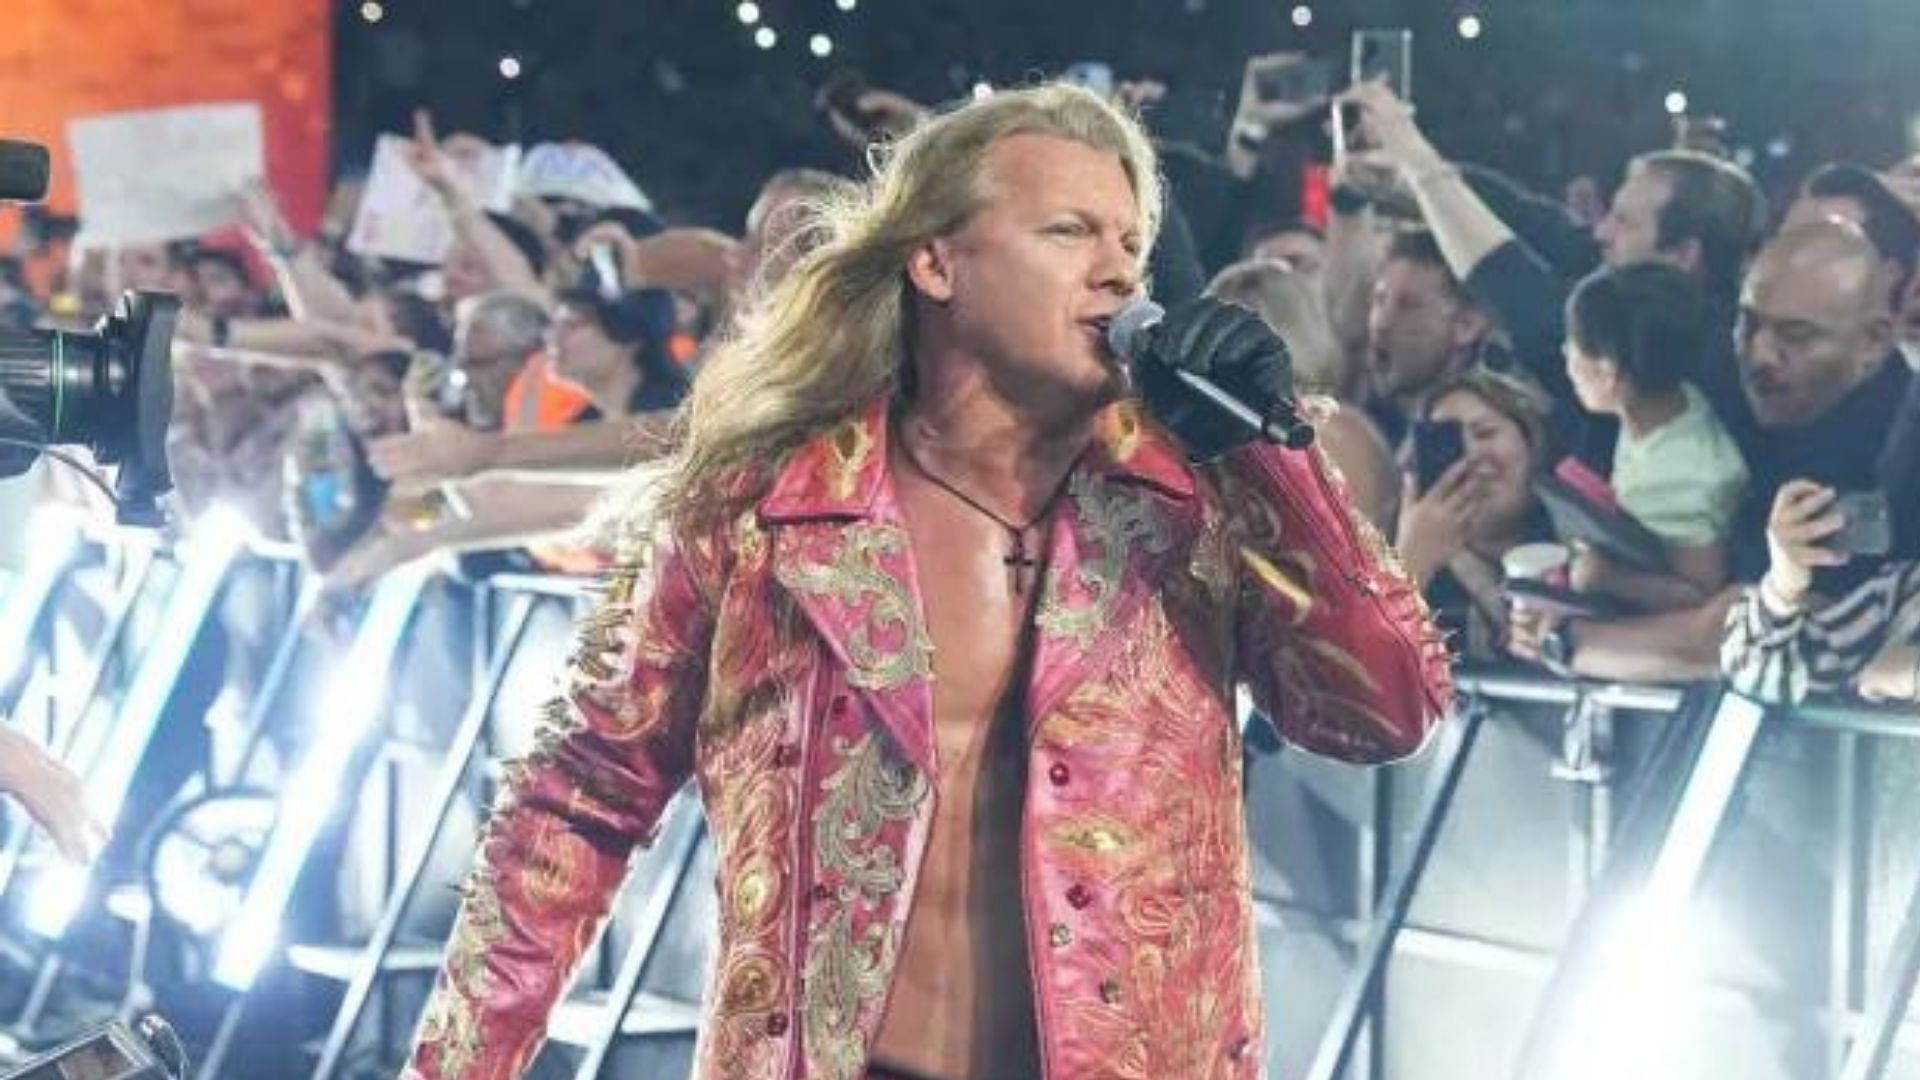 Chris Jericho got some pointers for his AEW All In entrance